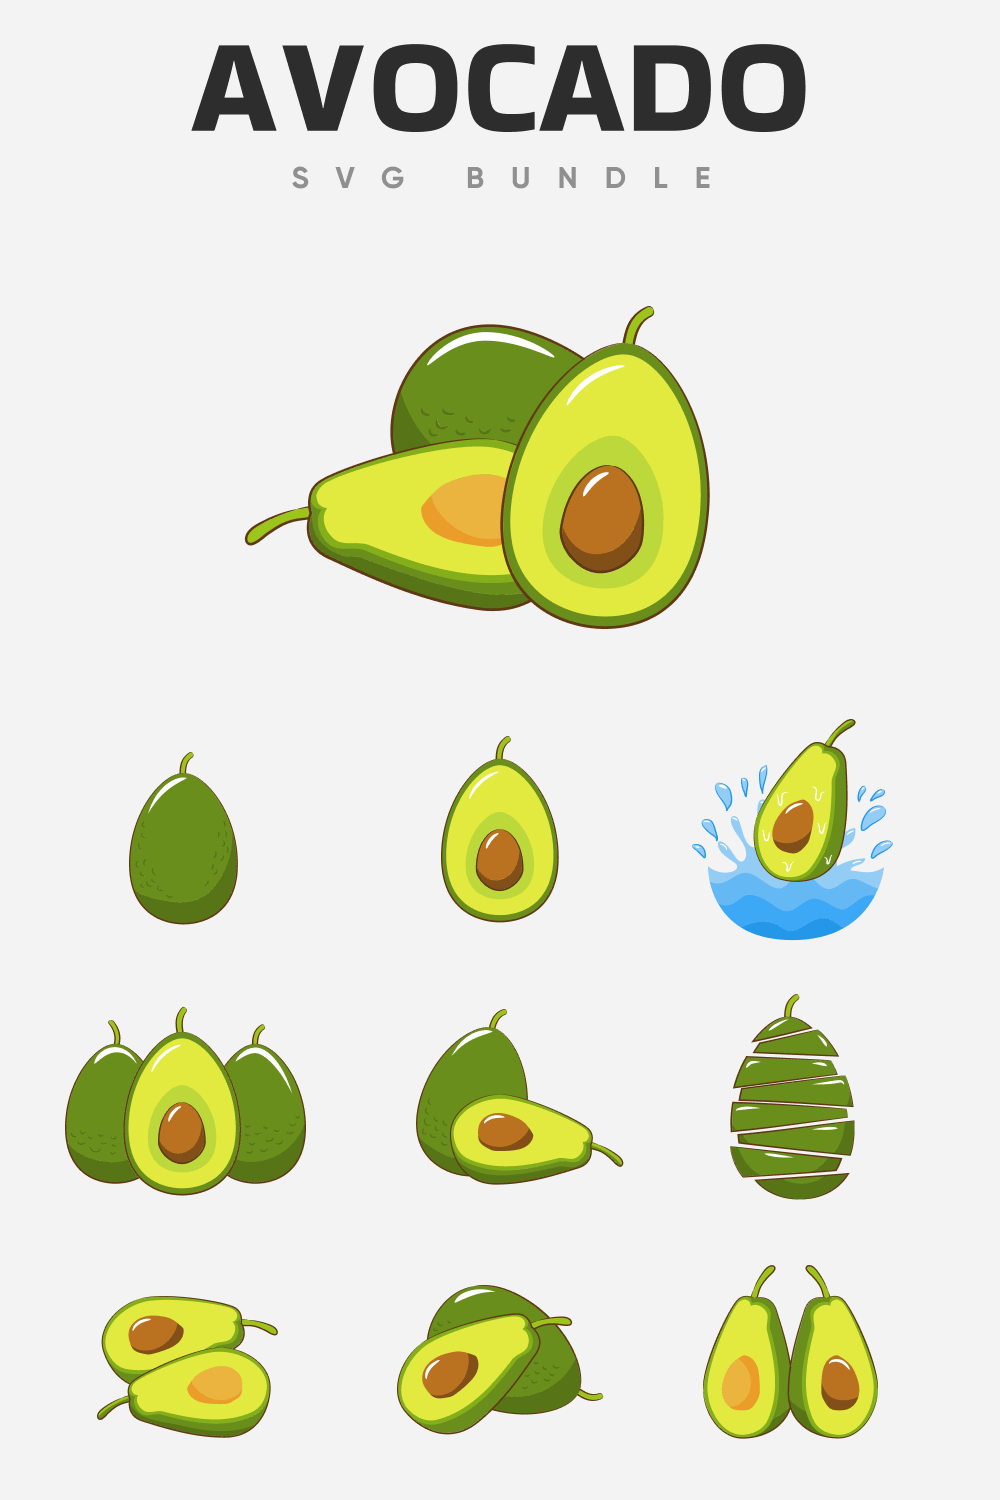 Several ripe avocados on a white background.